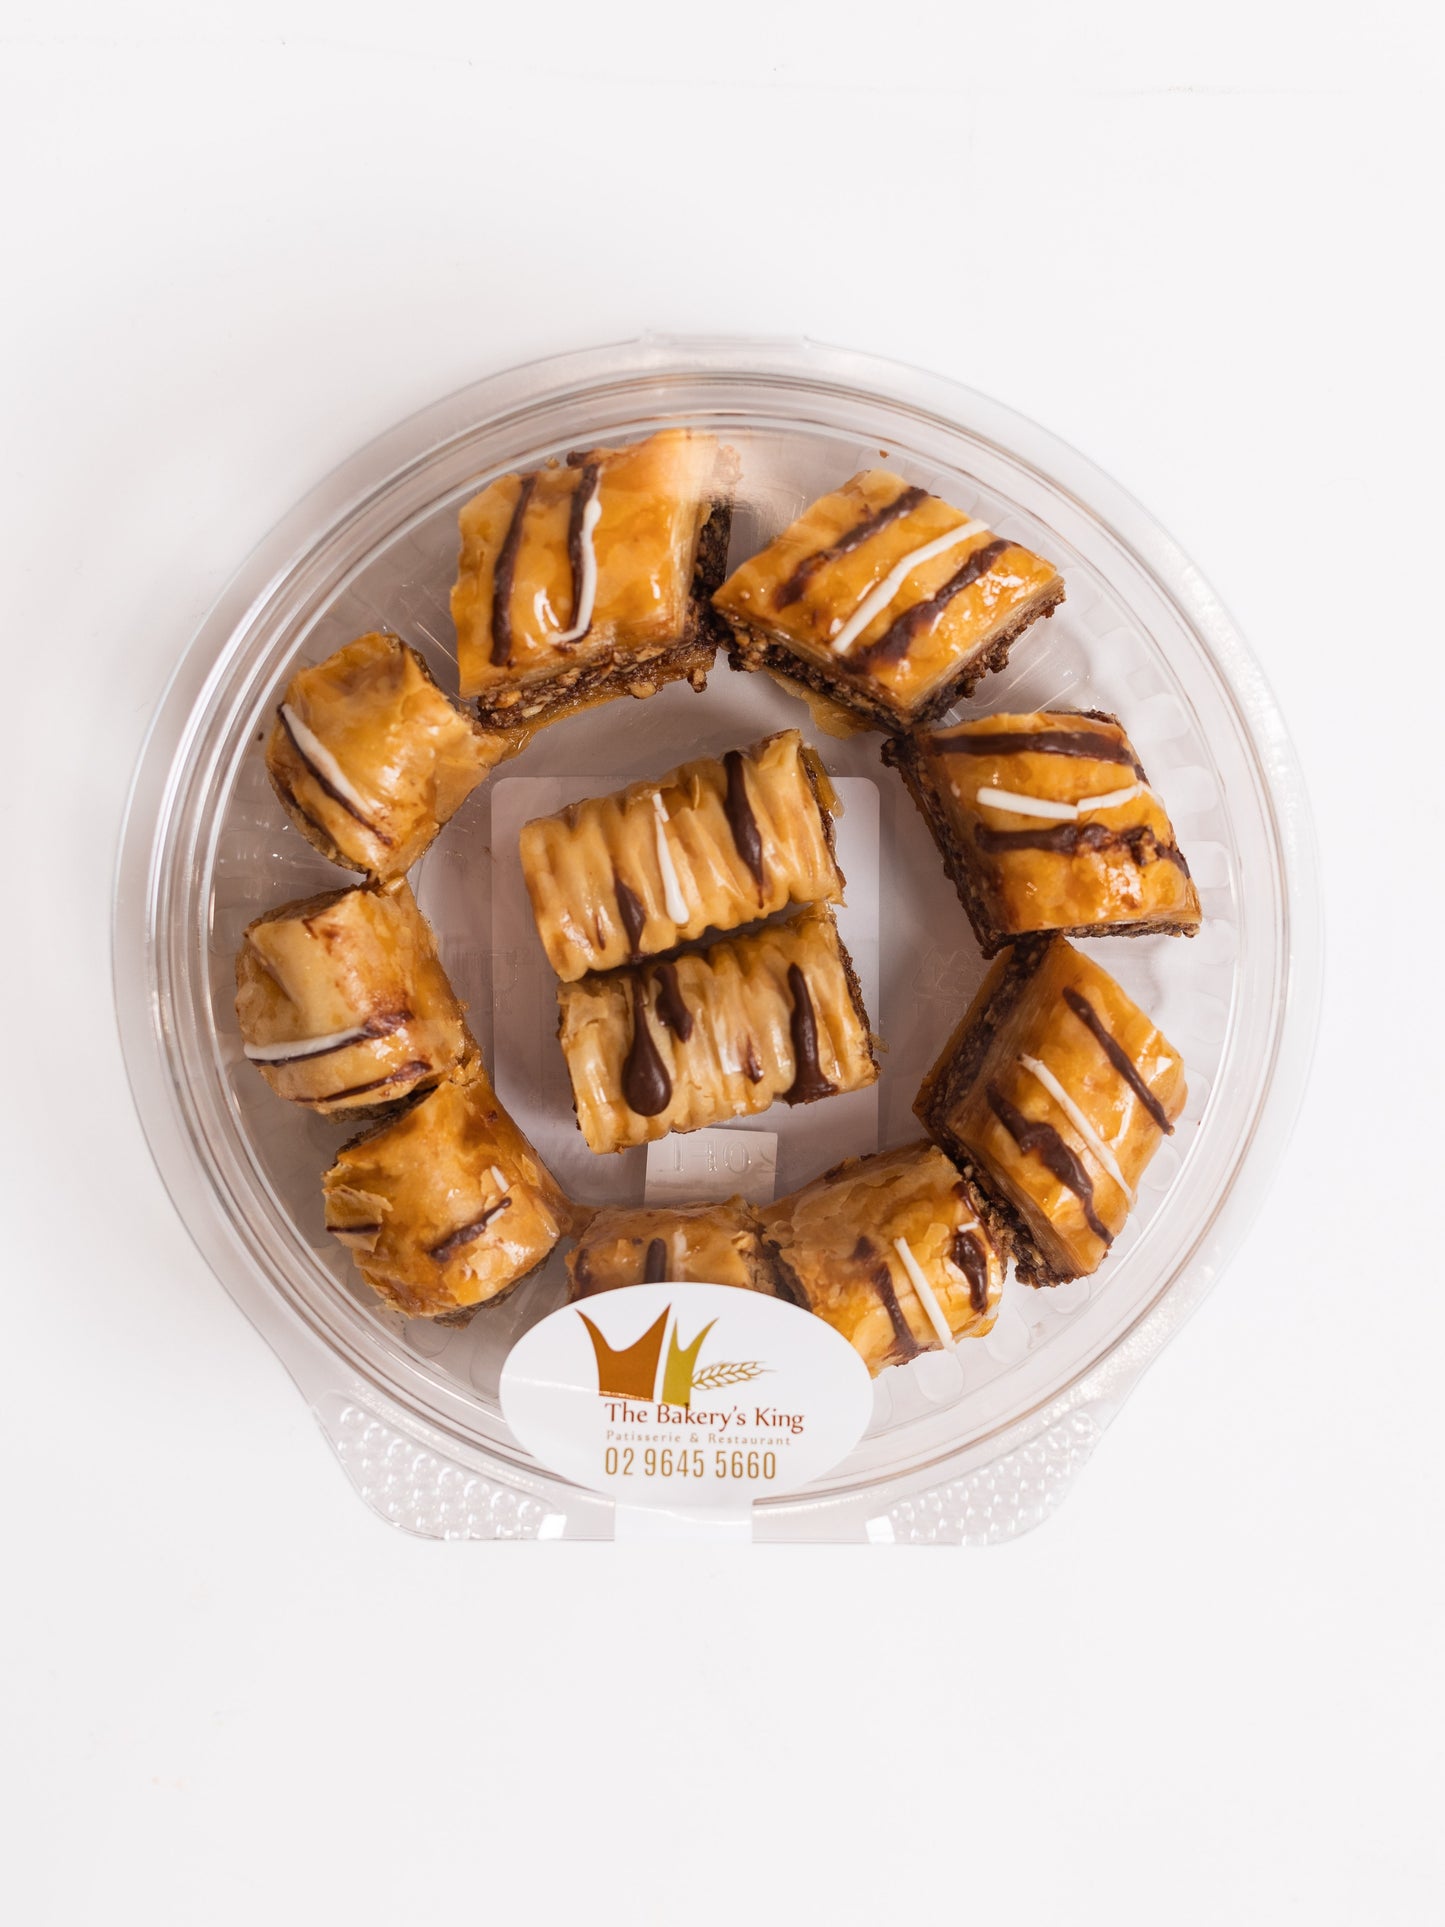 Baklawa with stuffed and drizzled chocolate